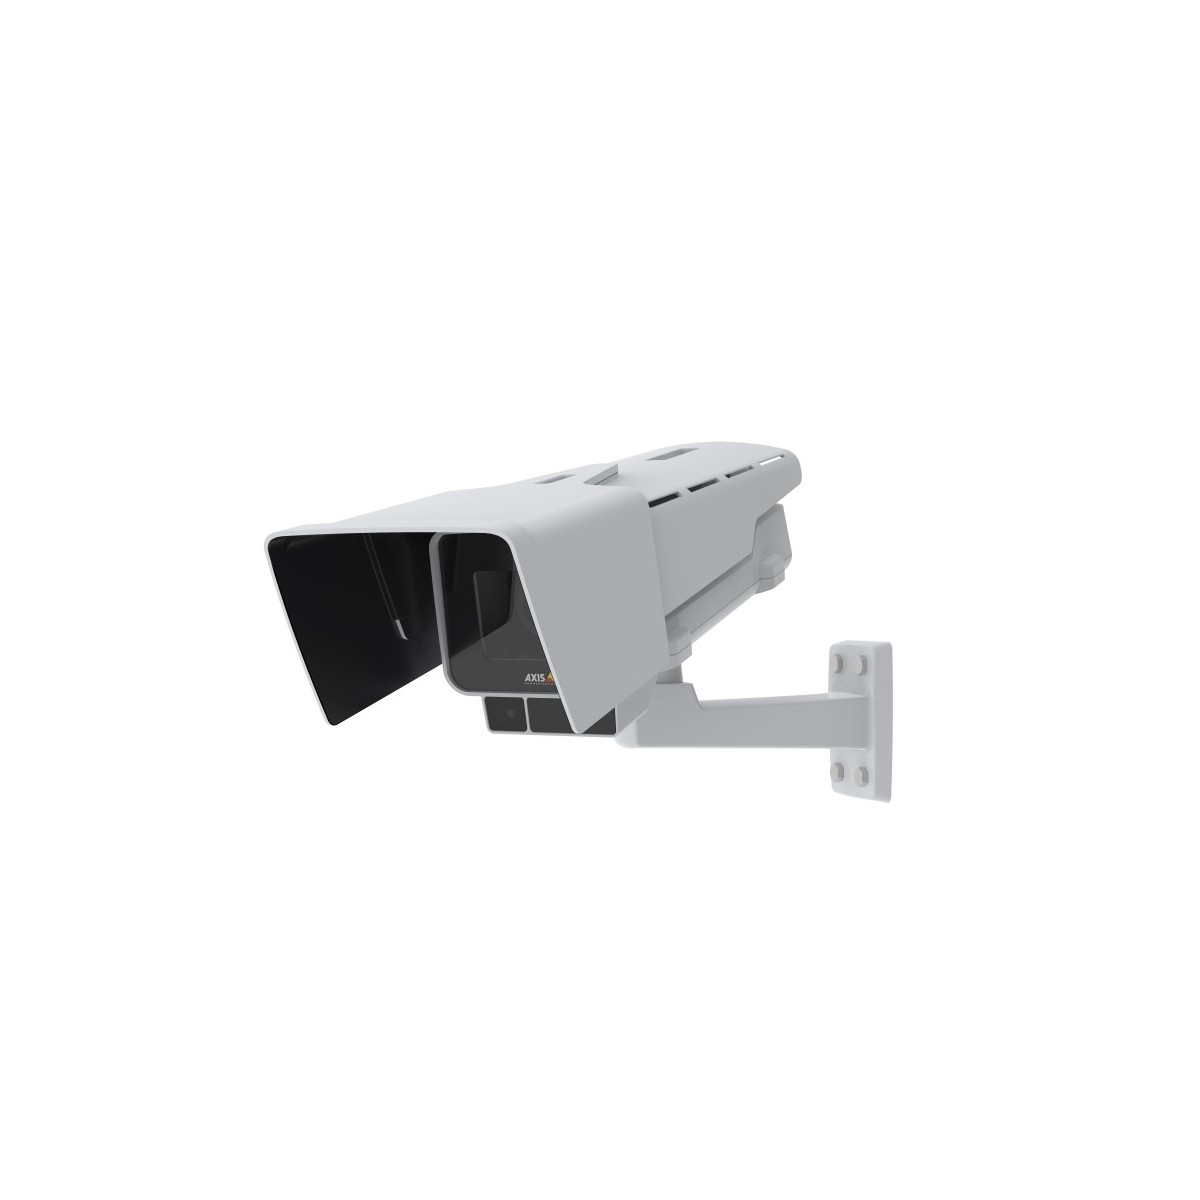 Axis P1378-LE - IP security camera - Outdoor - Wired - Digital PTZ - Pelco-D - Simplified Chinese - Traditional Chinese - German